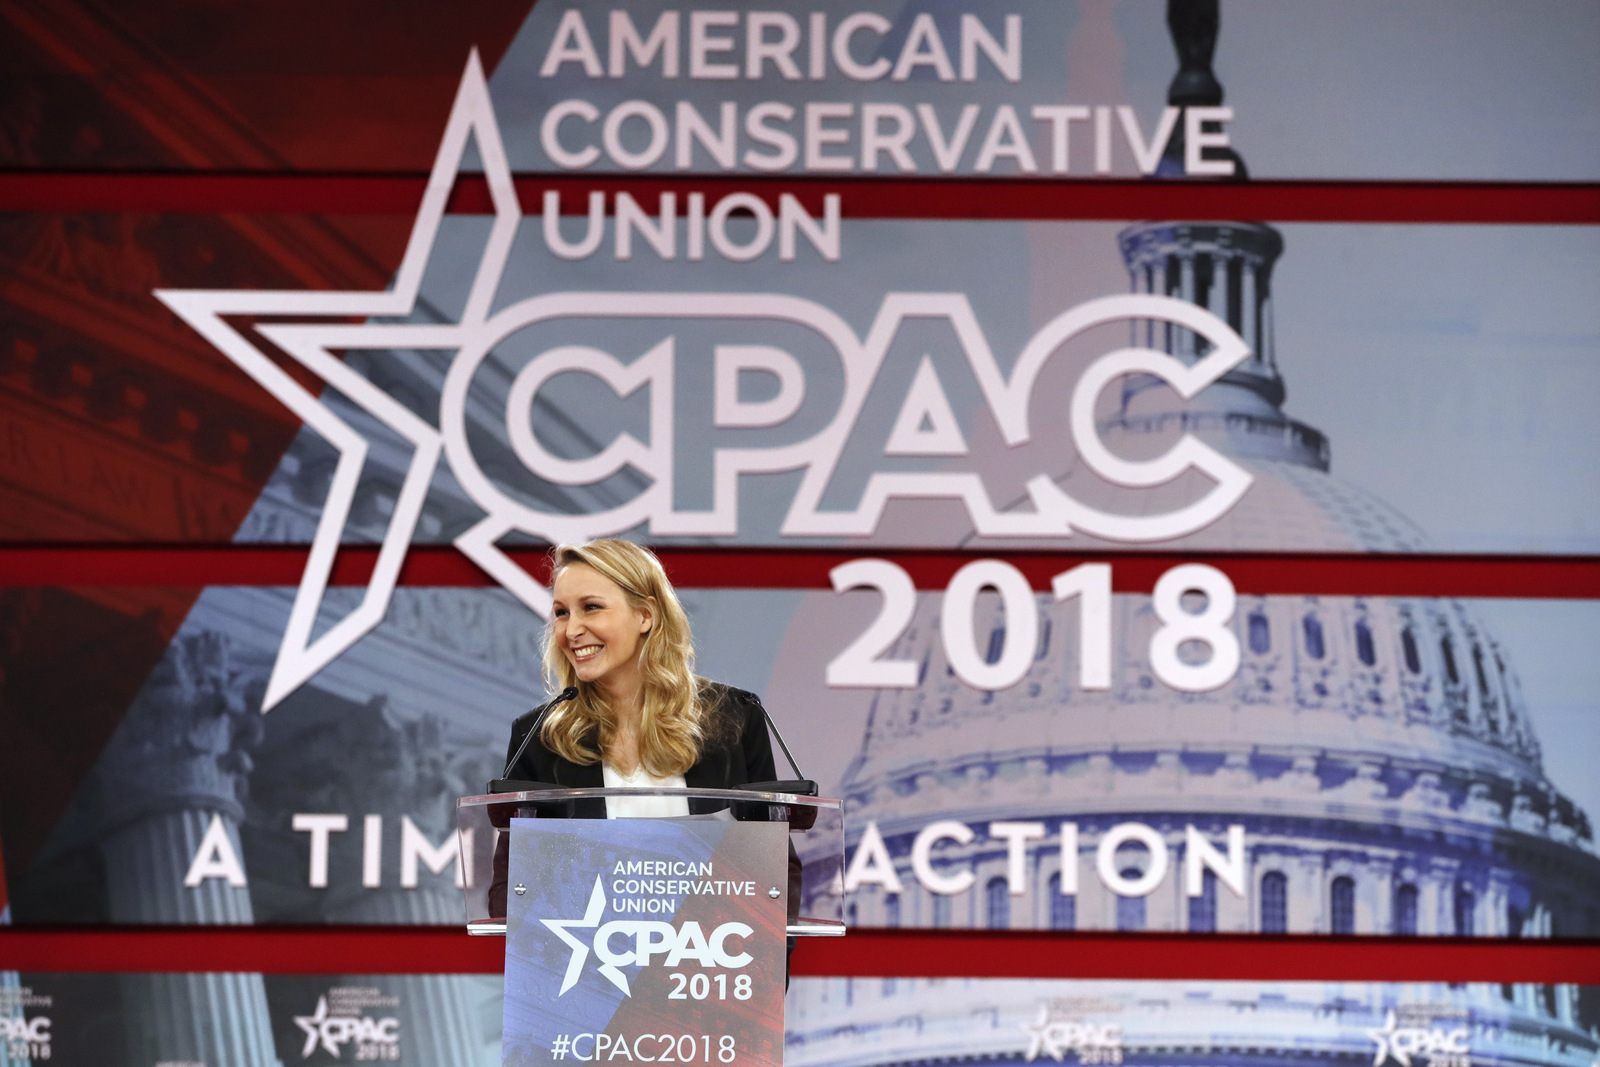 Marion Marechal-Le Pen, 28, speaks at the Conservative Political Action Conference (CPAC), at National Harbor, Md., Thursday, Feb. 22, 2018. Out of the shadows, the woman who was the rising star of France's far right National Front until she left politics, is emerging on the other side of the Atlantic, stepping into the limelight as a speaker at a major forum for American conservatives. (AP/Jacquelyn Martin)